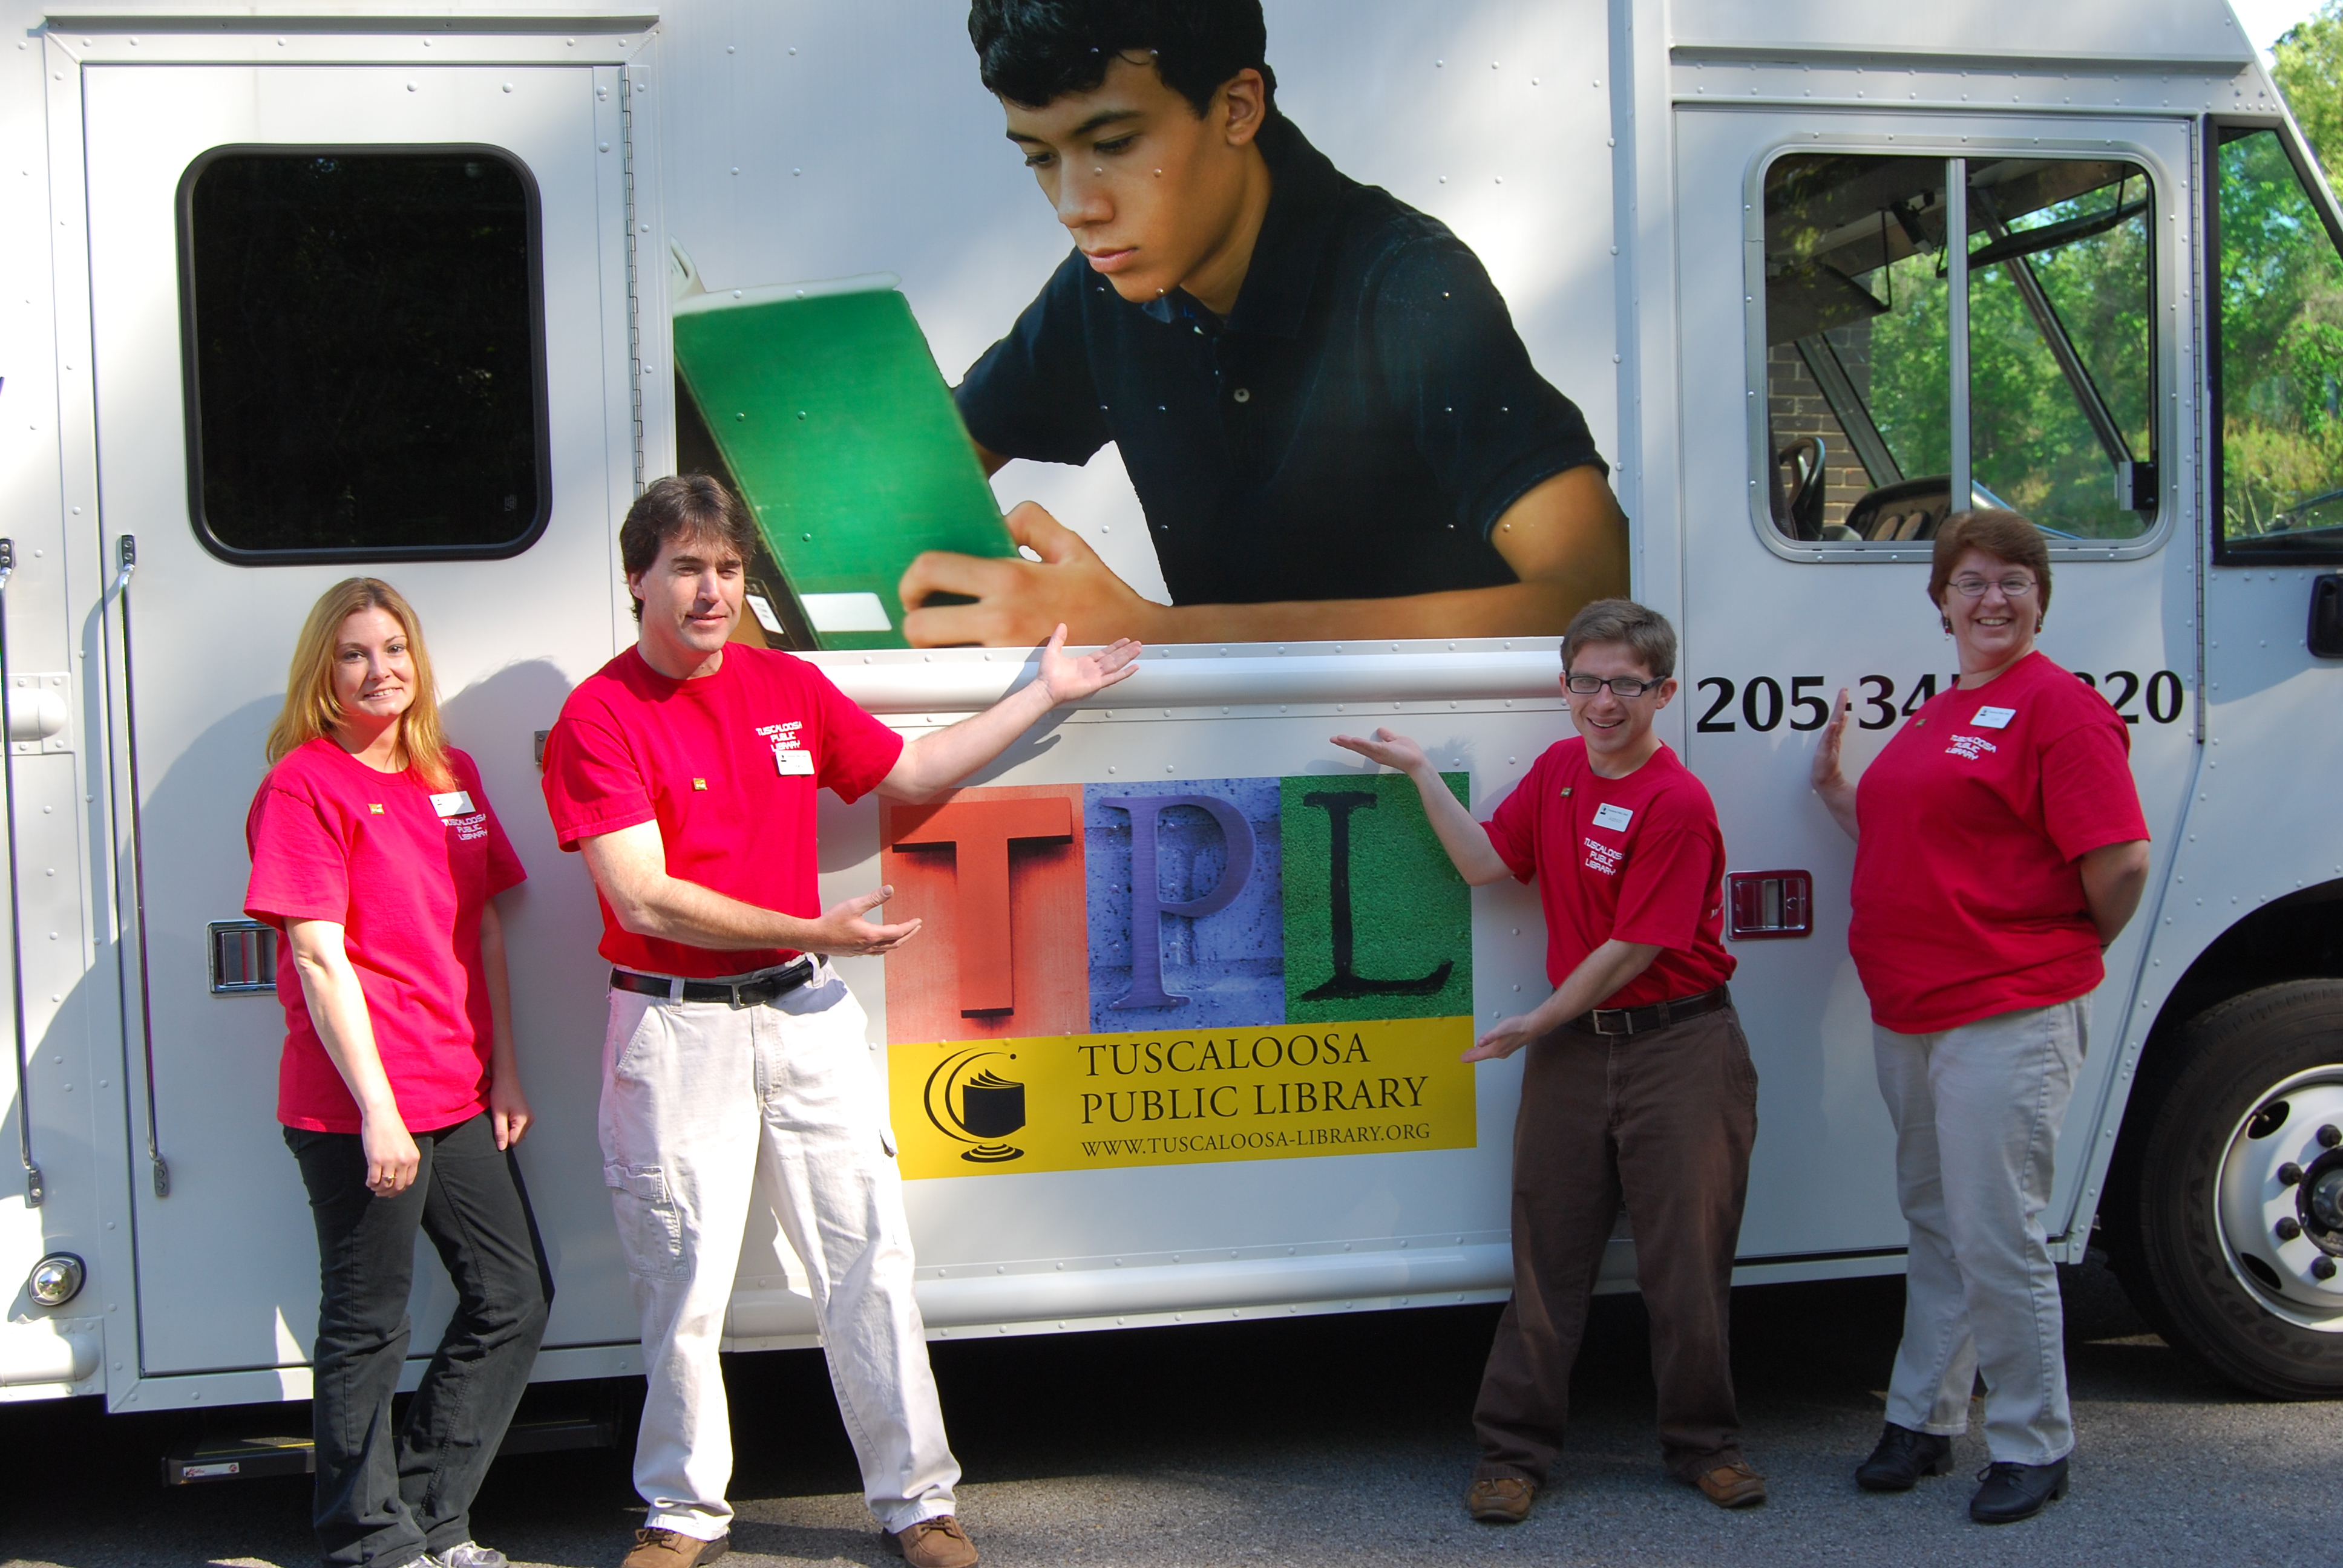 Staffers (left to right) Tammy Adams, Kelly Butler, Addison Canevaro, and Lynn Allen show off the Tuscaloosa (Ala.) Public Library bookmobile during National Bookmobile Day April 13, as part of NLW.